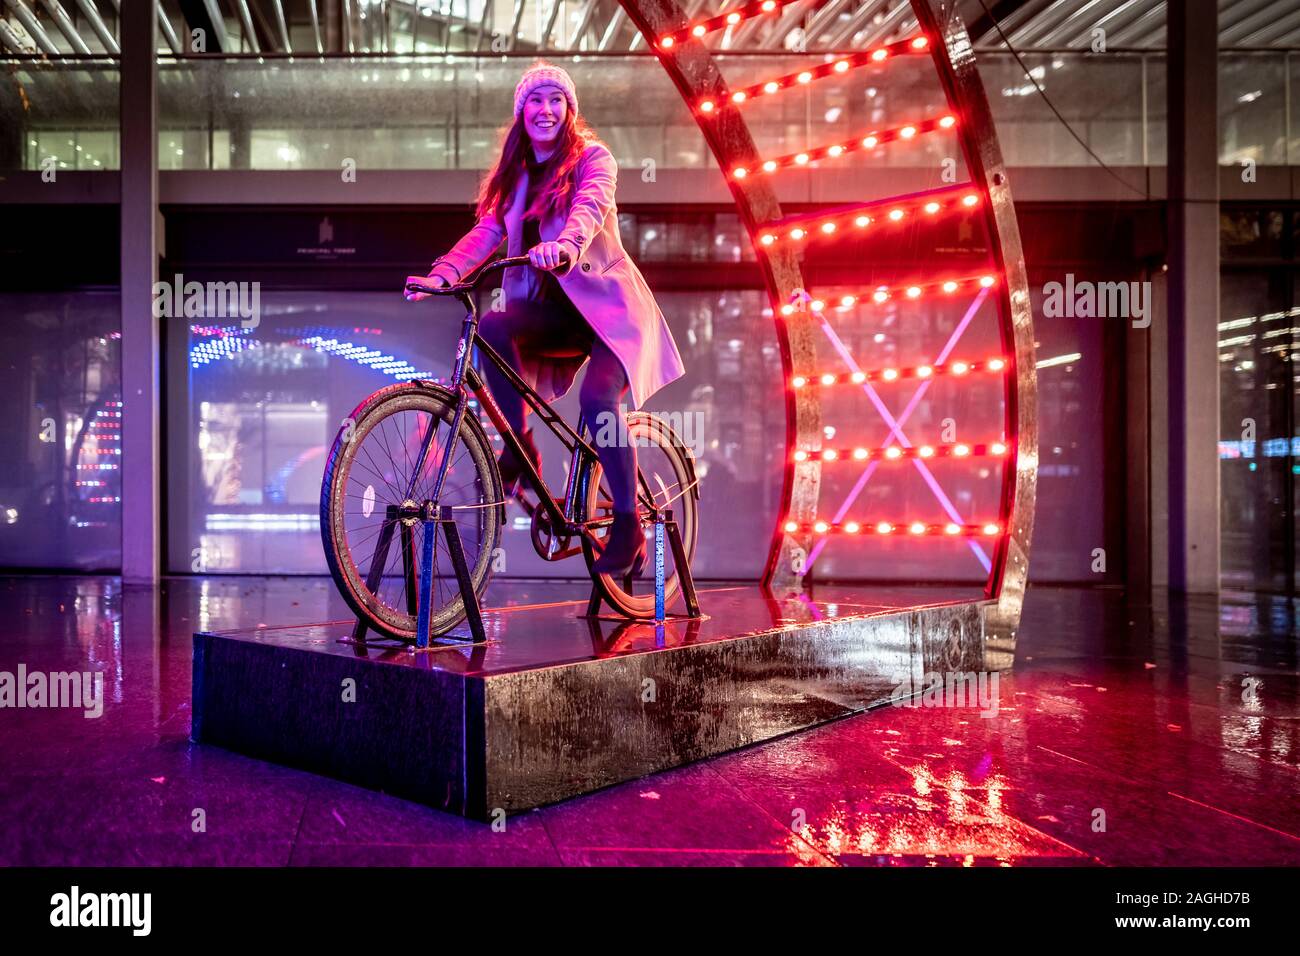 London, UK. 19th December, 2019. IlluminoCity exhibition by Light Art Collection. Student Jasmine Cook, 19, rides 'Lightbattle X' installation, a unique interactive bicycle light-artwork designed by Venividimultiplex, part of IlluminoCity exhibition in Principal Place, Shoreditch. Credit: Guy Corbishley/Alamy Live News Stock Photo